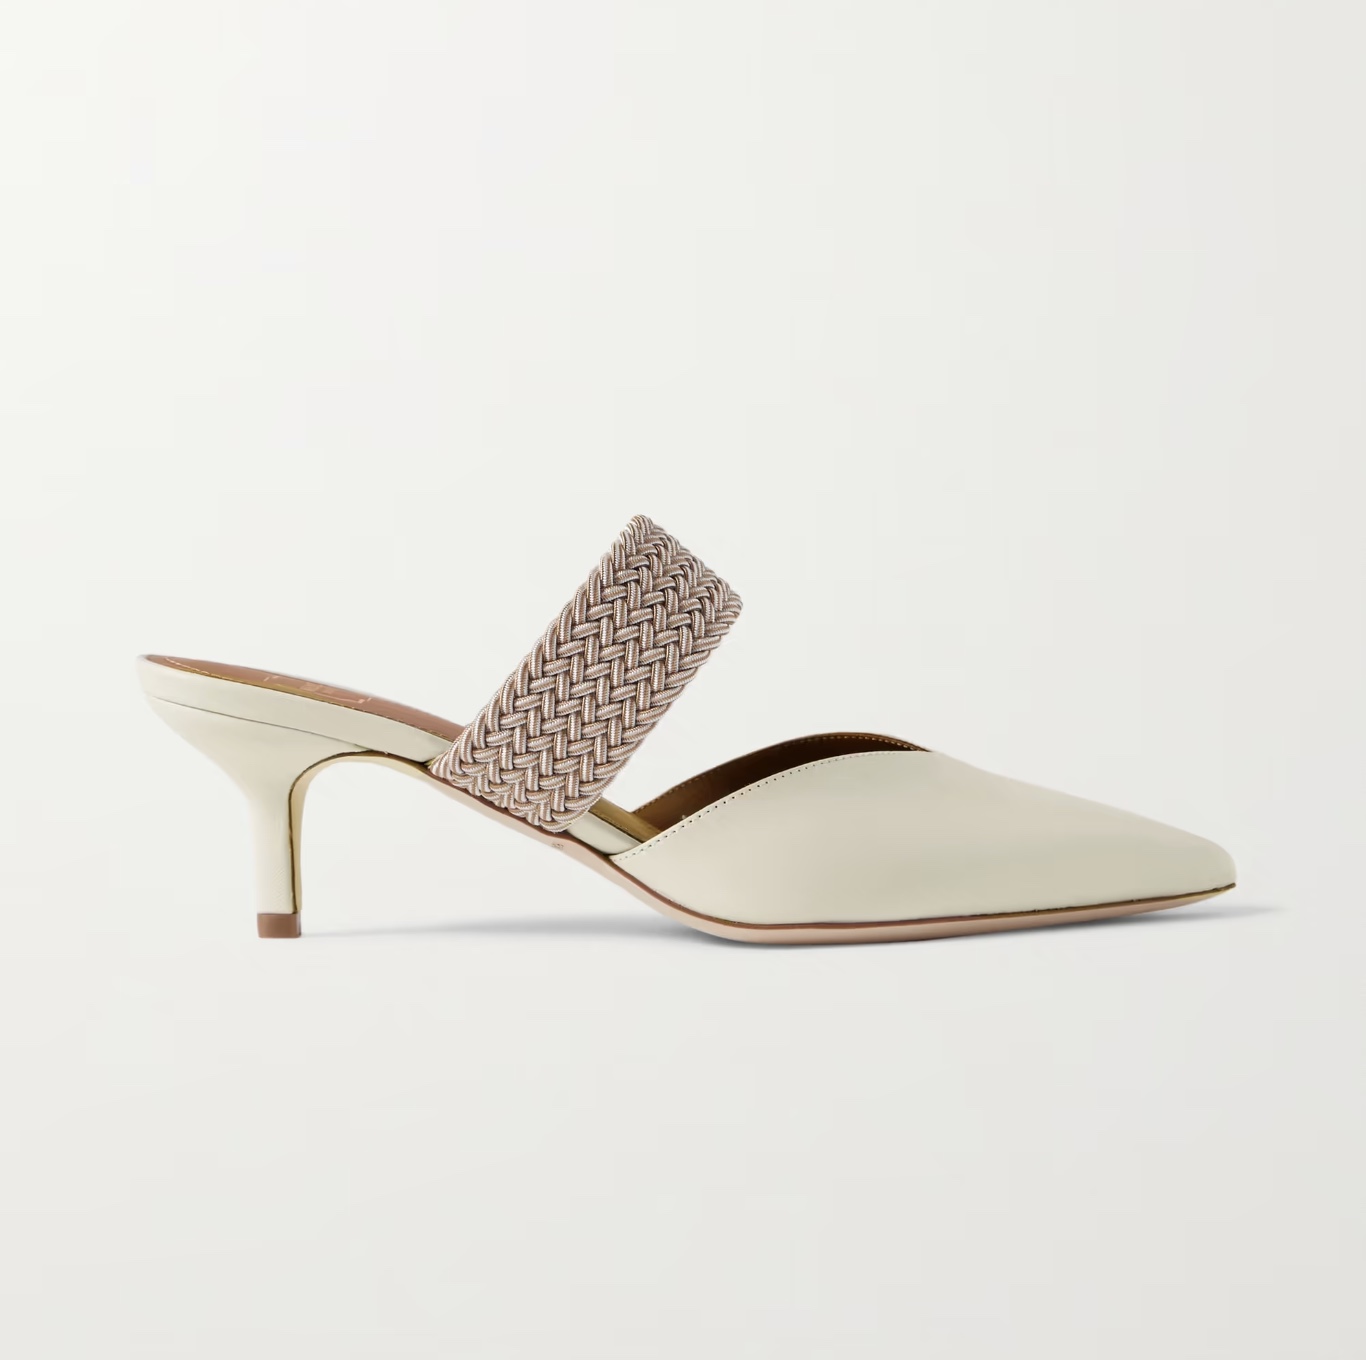 Malone Soulier Maisie Mules flat wedding shoes